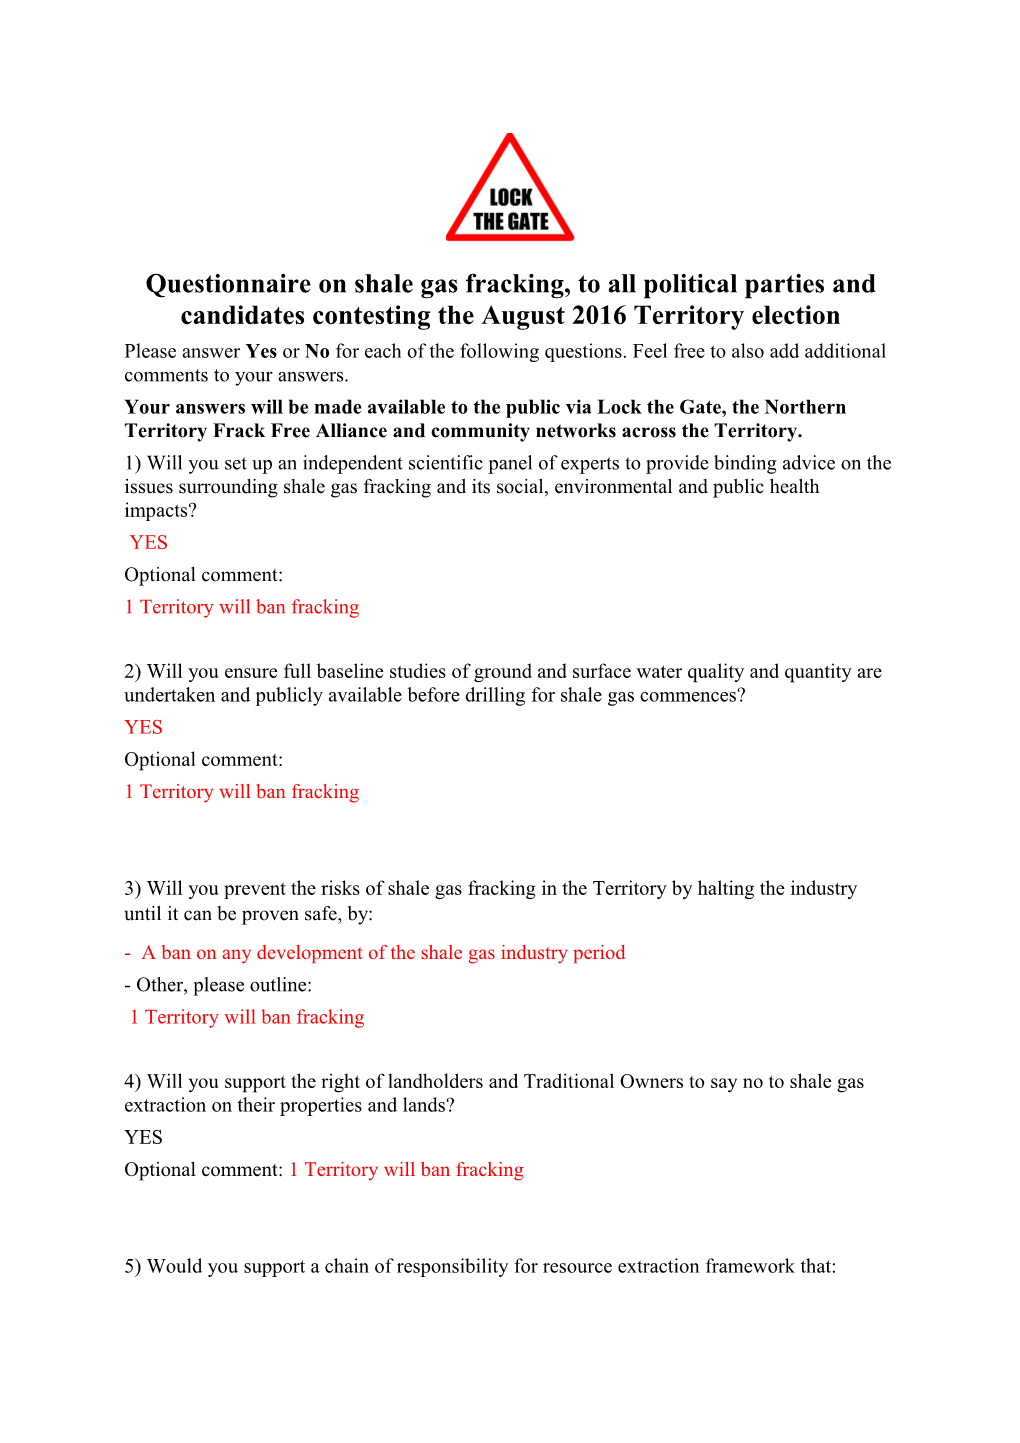 Questionnaire on Shale Gas Fracking, to All Political Parties and Candidates Contesting